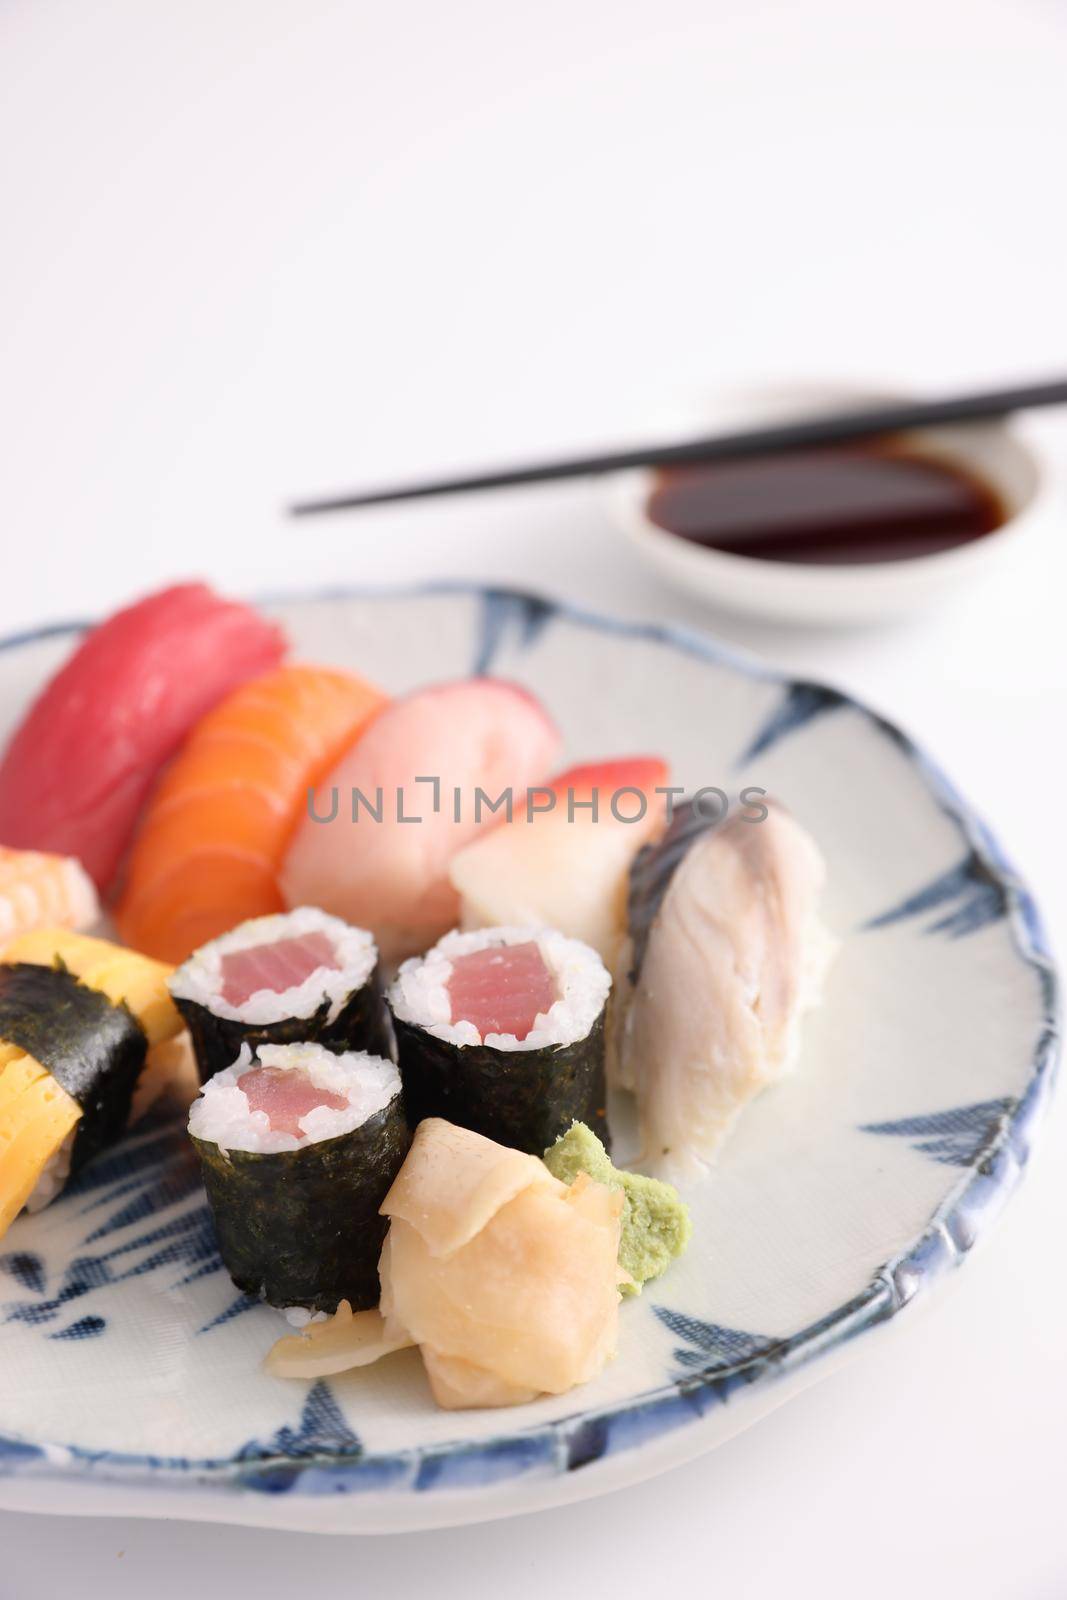 Sushi Set nigiri and sushi rolls with soy sauce and chopsticks Japanese food isolated in white background